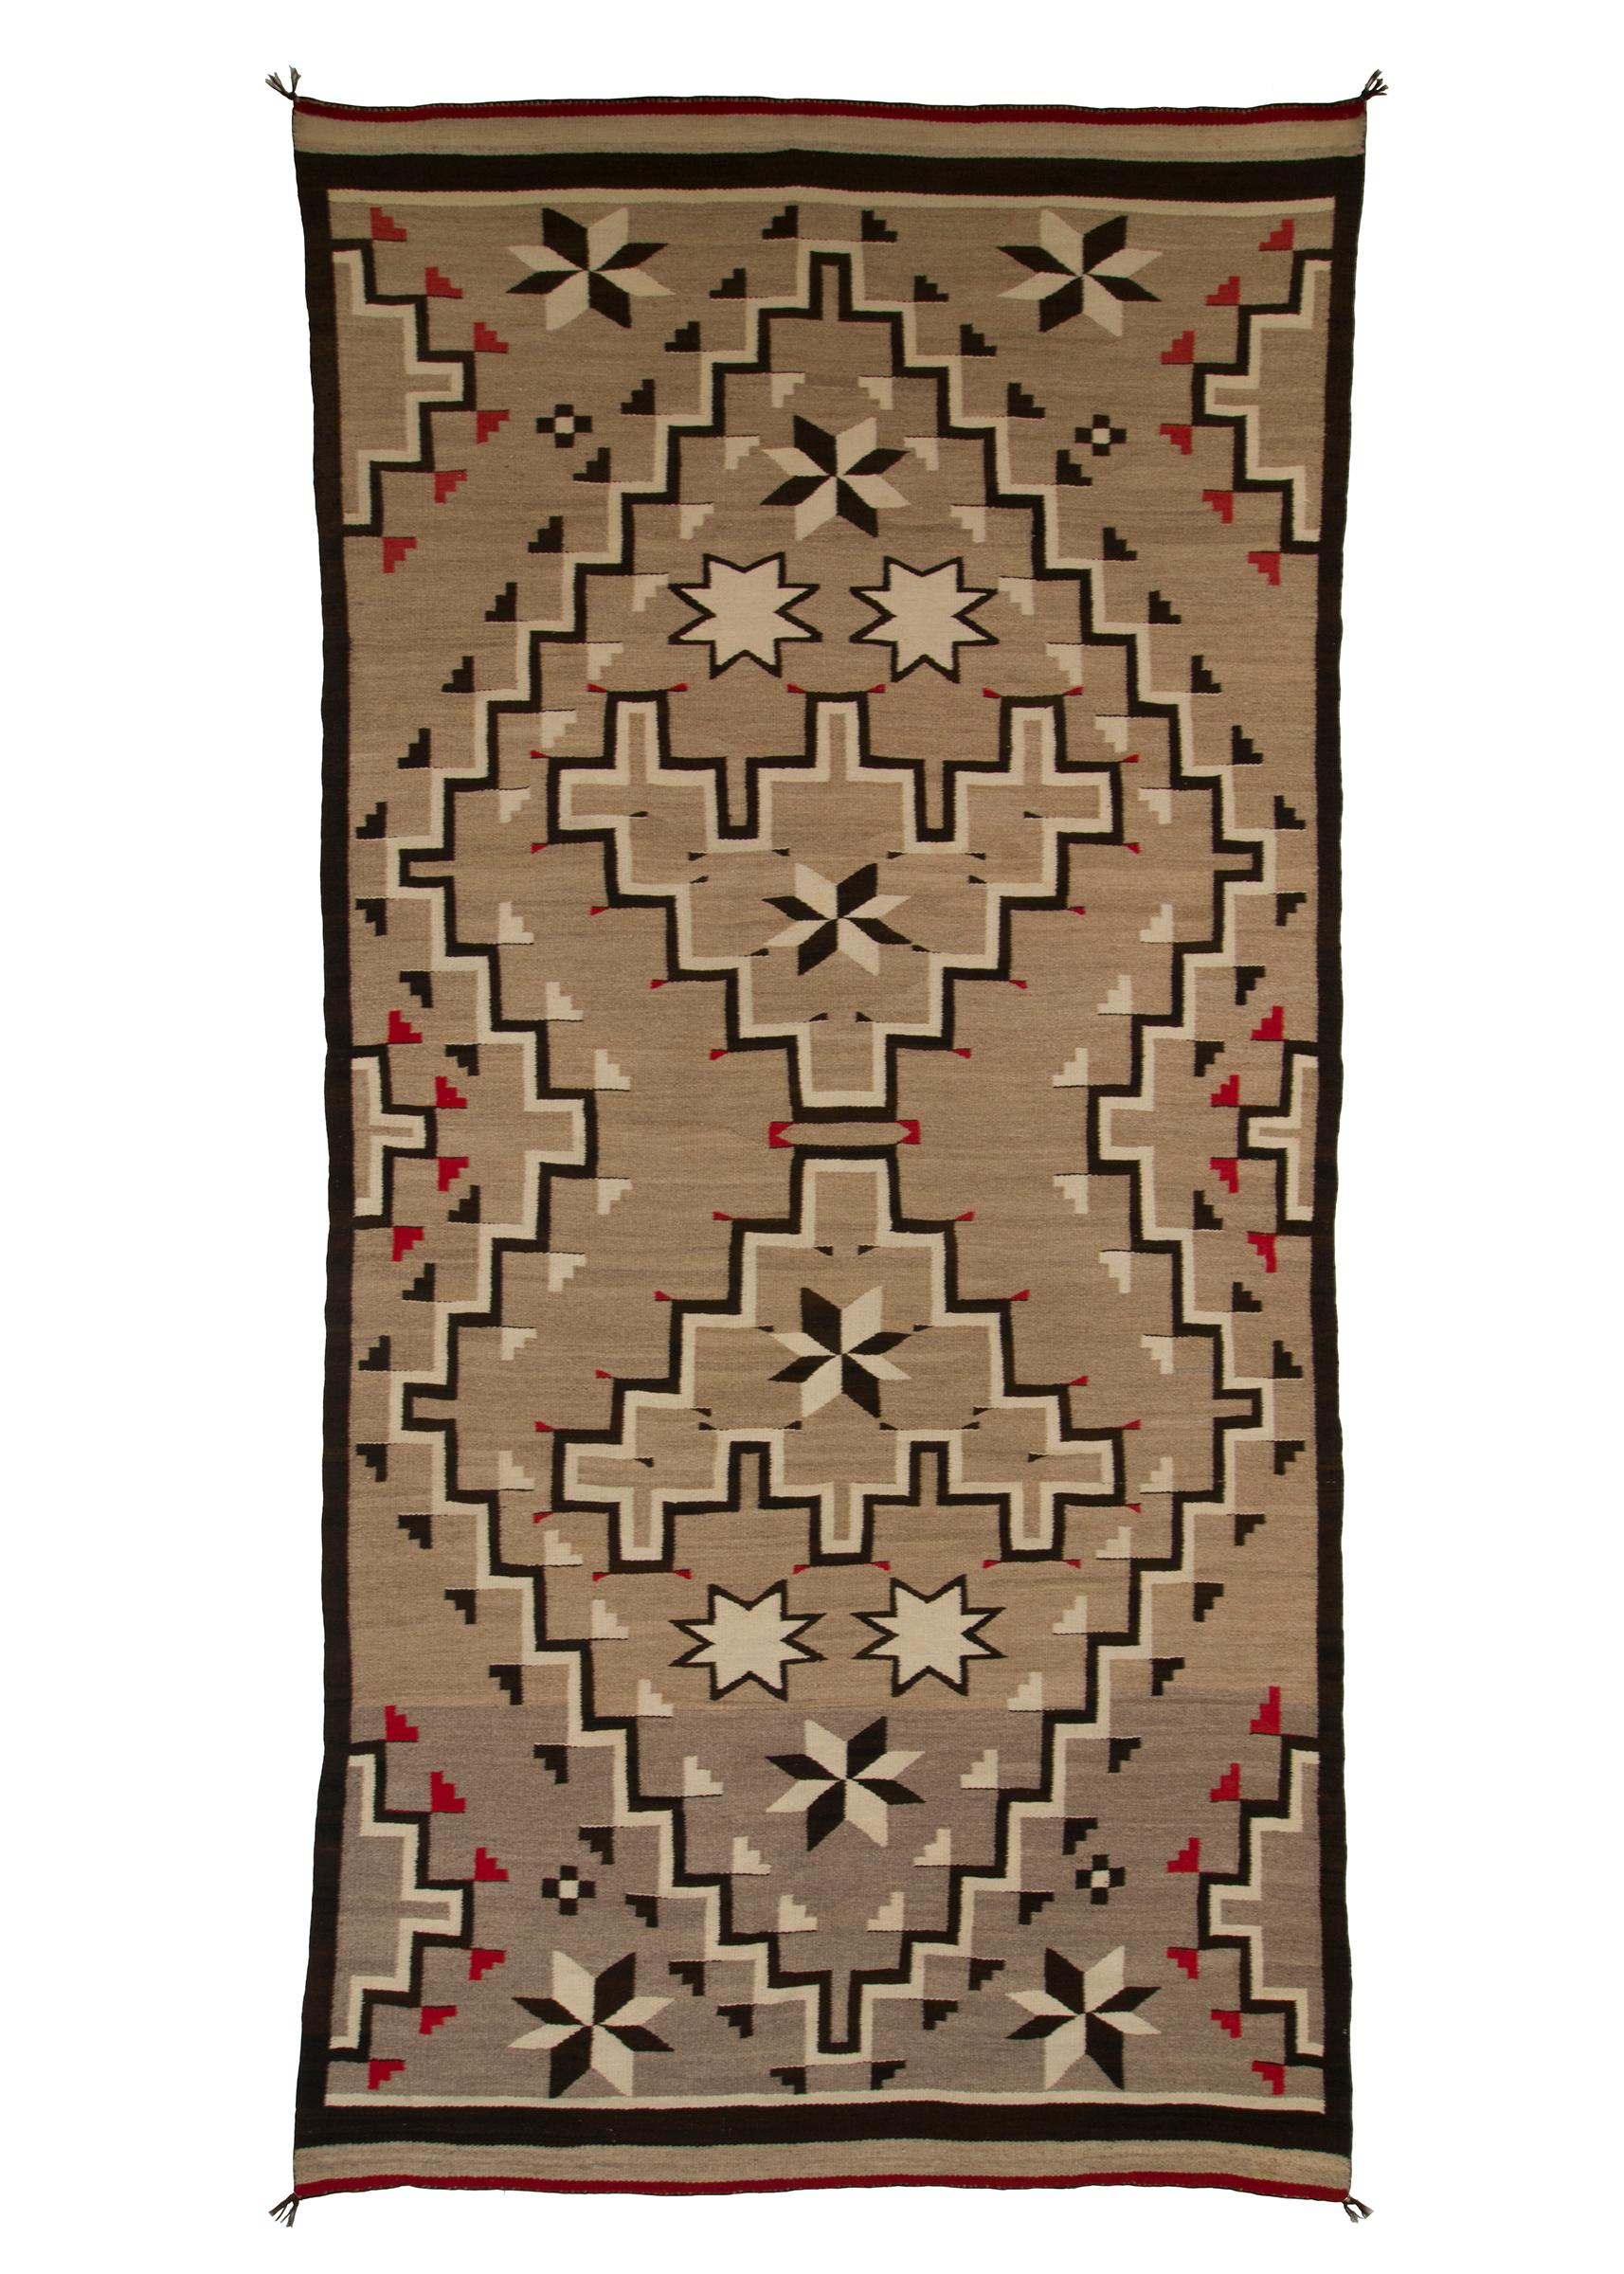 Navajo rug from the Trading Post Era, handwoven textile created in the 1920s-1940s, circa 1935. Woven of native hand-spun wool in natural fleece colors of gray/brown/tan with a geometric pattern in white/ivory, black/brown and red (dyed with